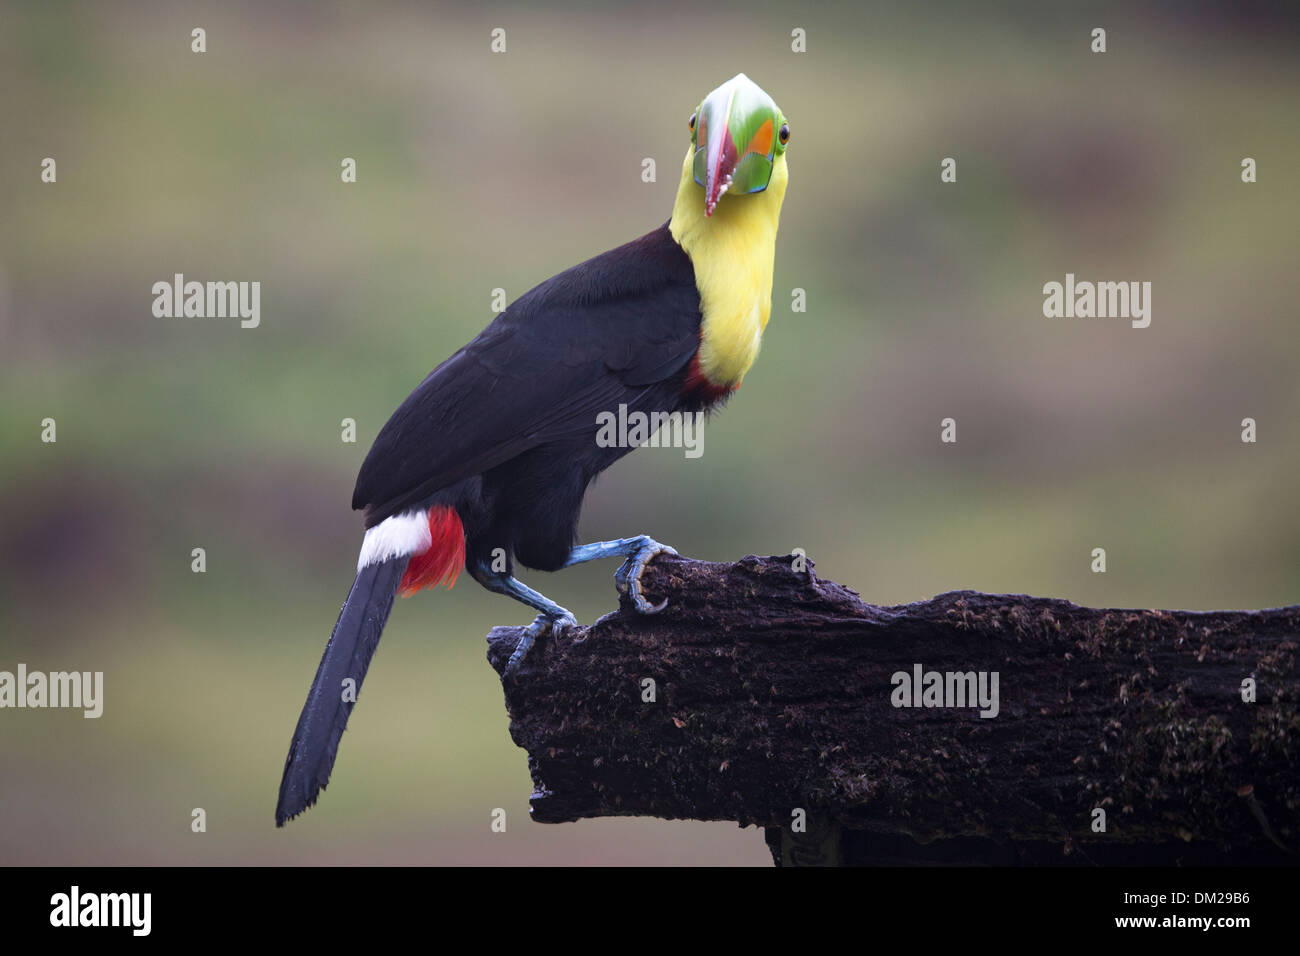 Keel-billed Toucan (Ramphastos sulfuratus) perched on tree branch in Costa Rica Stock Photo